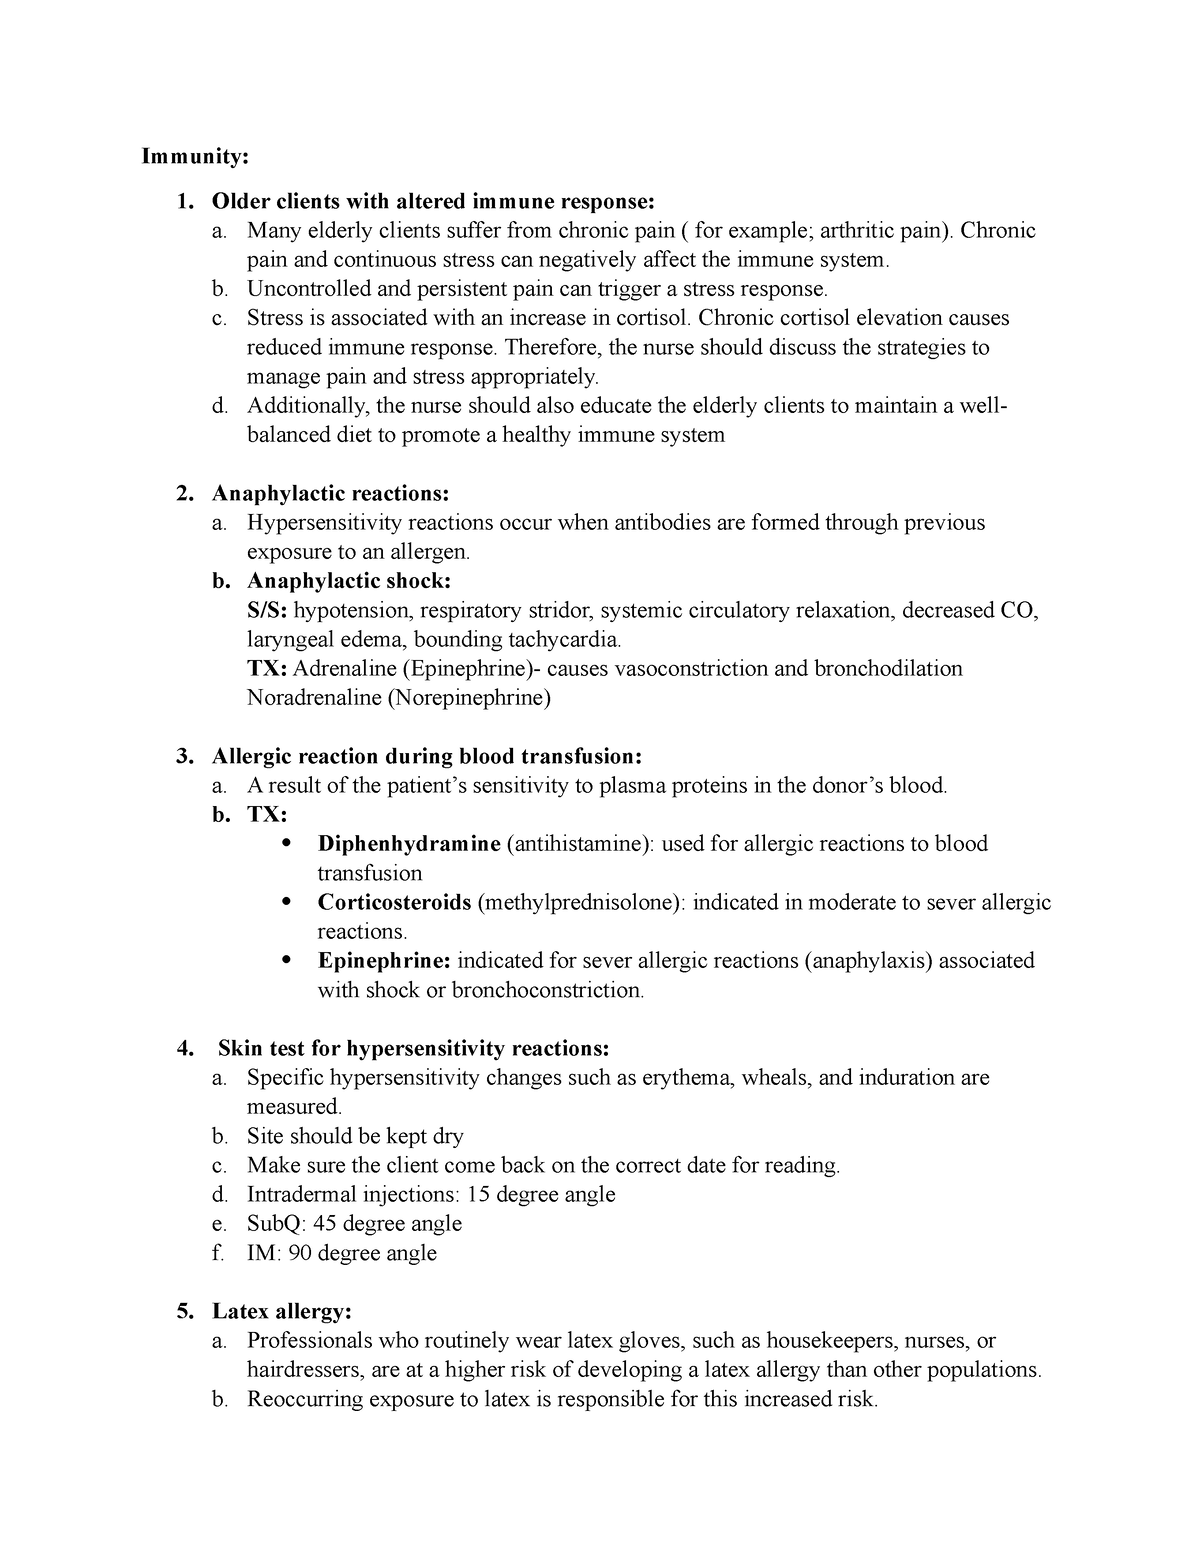 Immunity - NCLEX prep notes - Immunity: 1. Older clients with altered ...